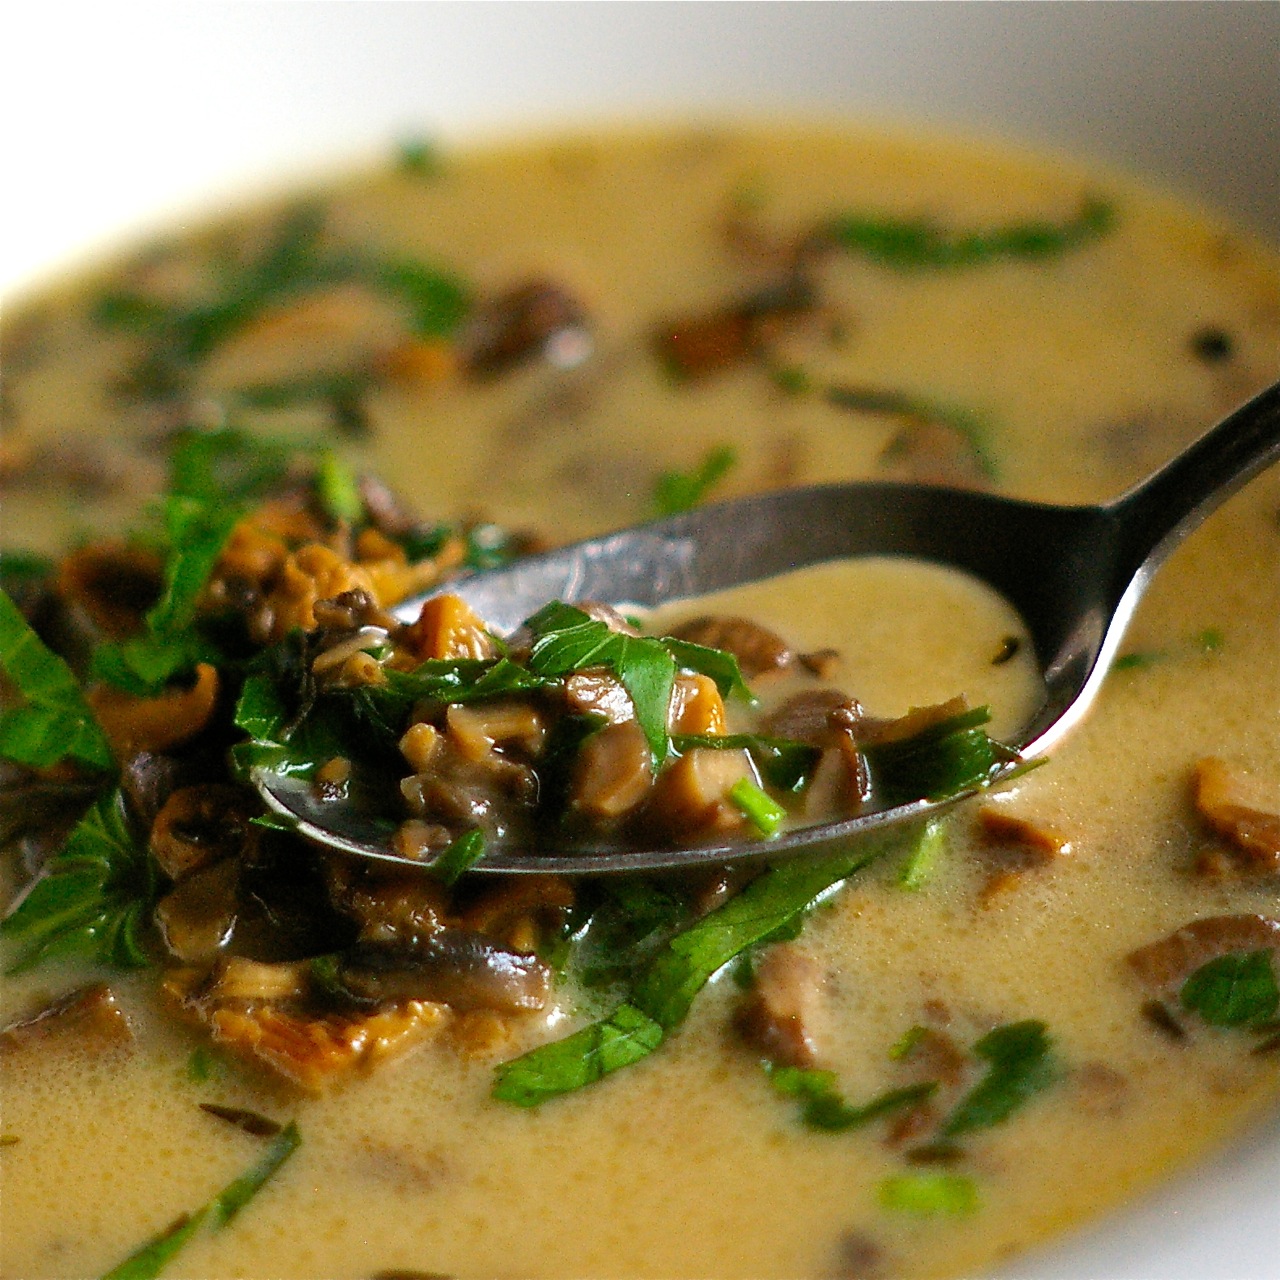 The Yum Yum Factor: Its Friday So It Must Be Soup! Creamy Mushroom Soup